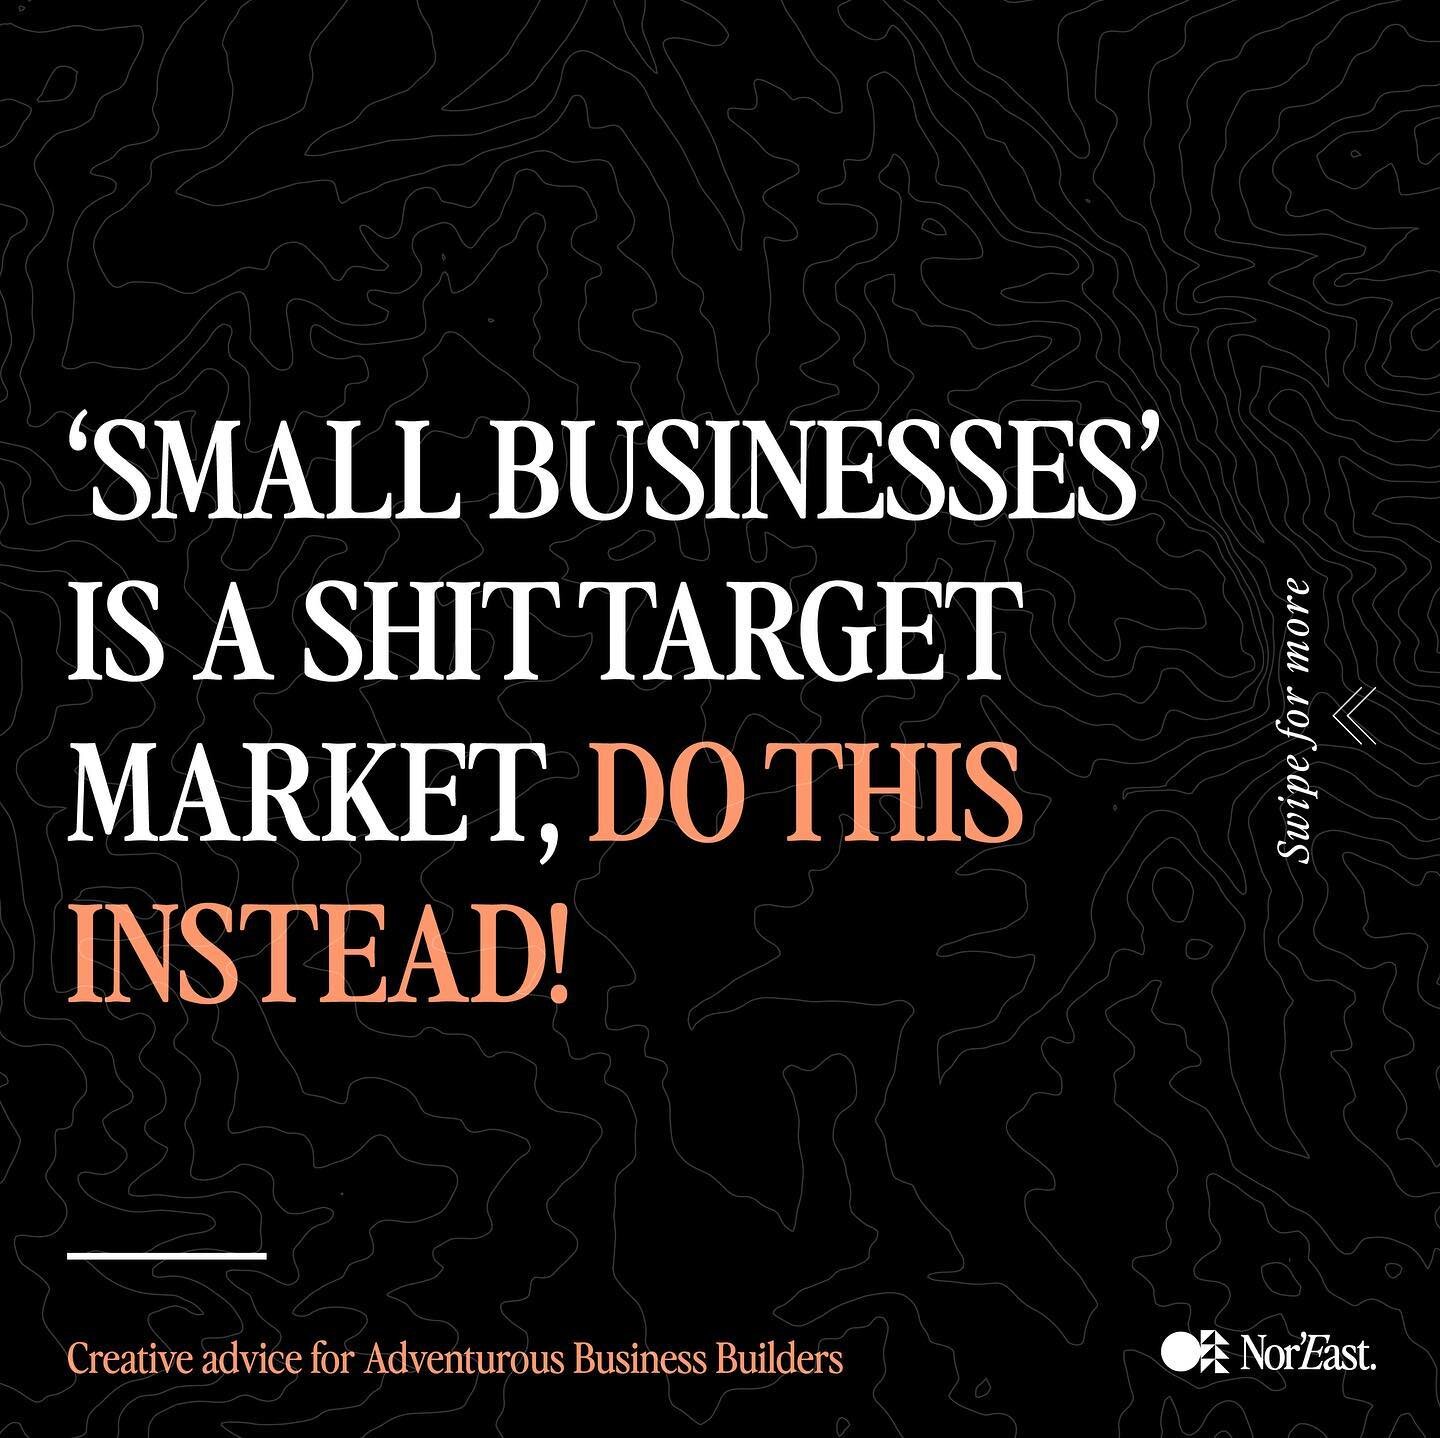 Stop marketing to &lsquo;Small Businesses&rsquo;! It&rsquo;s time to define who the hell you&rsquo;re selling to, what is your unique market, who are they and what obstacles do they face?
-
-
#designfortheadventurous #noreast #branding #newcastlebusi